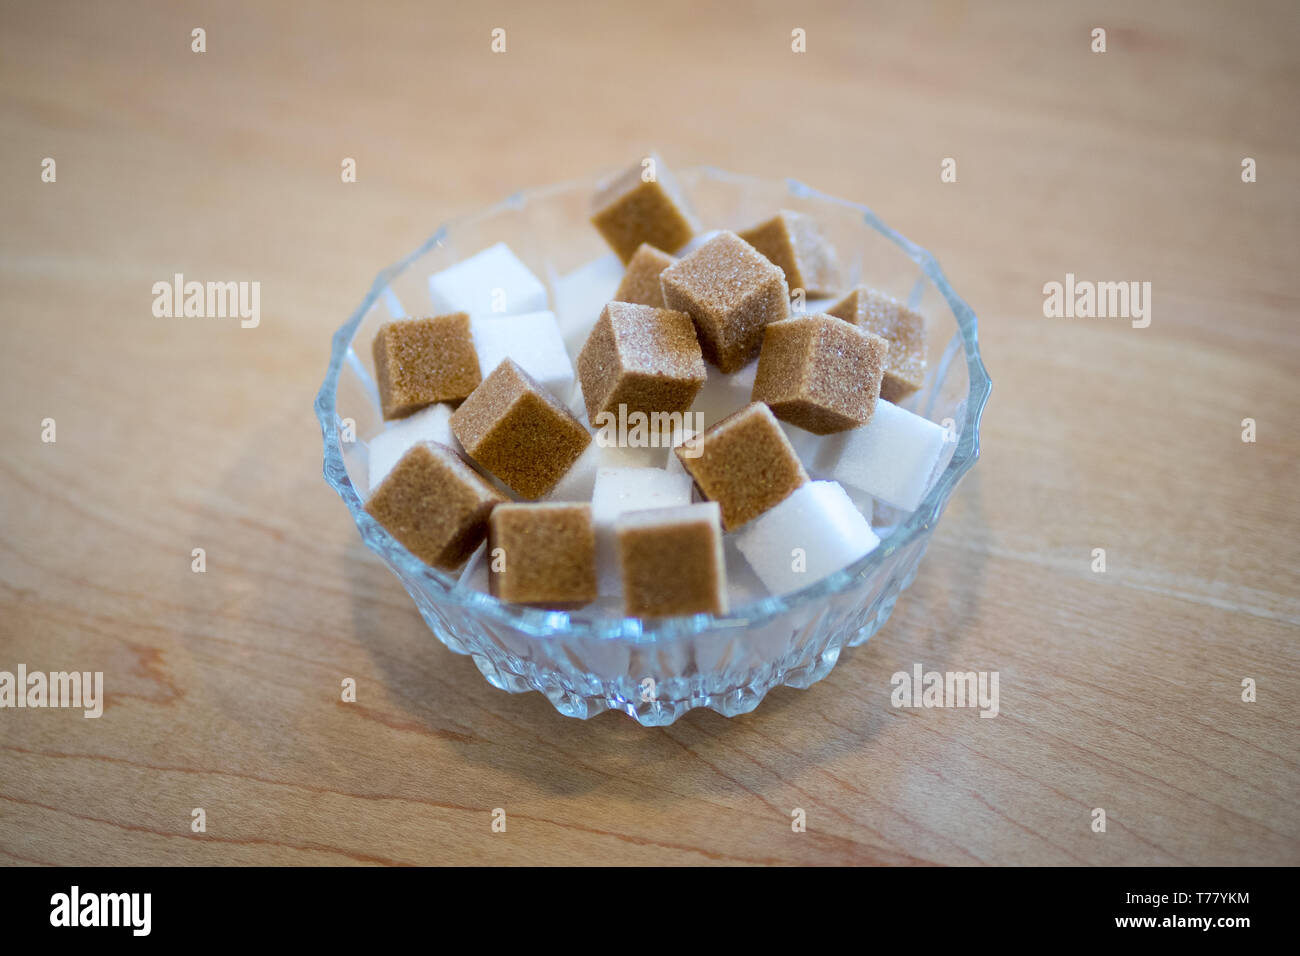 Brown sugar cubes and white sugar cubes in a glass bowl. Stock Photo